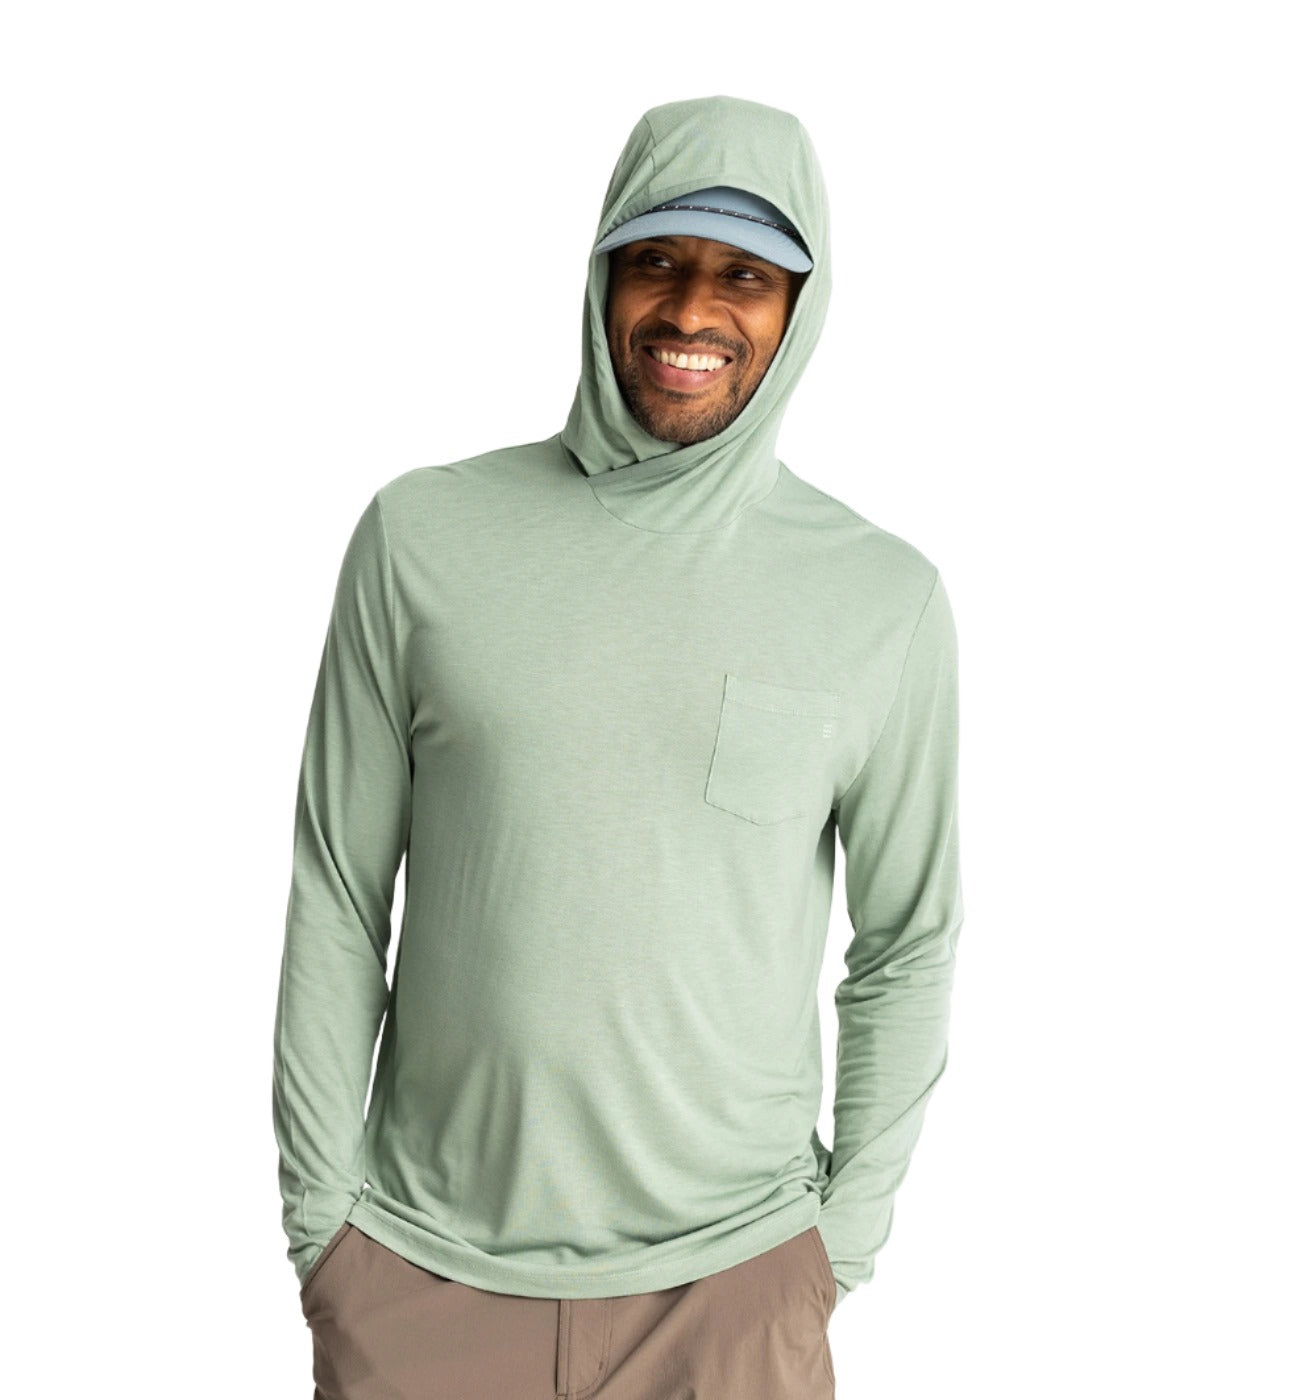 Bamboo Lightweight Hoodie for Men – Half-Moon Outfitters